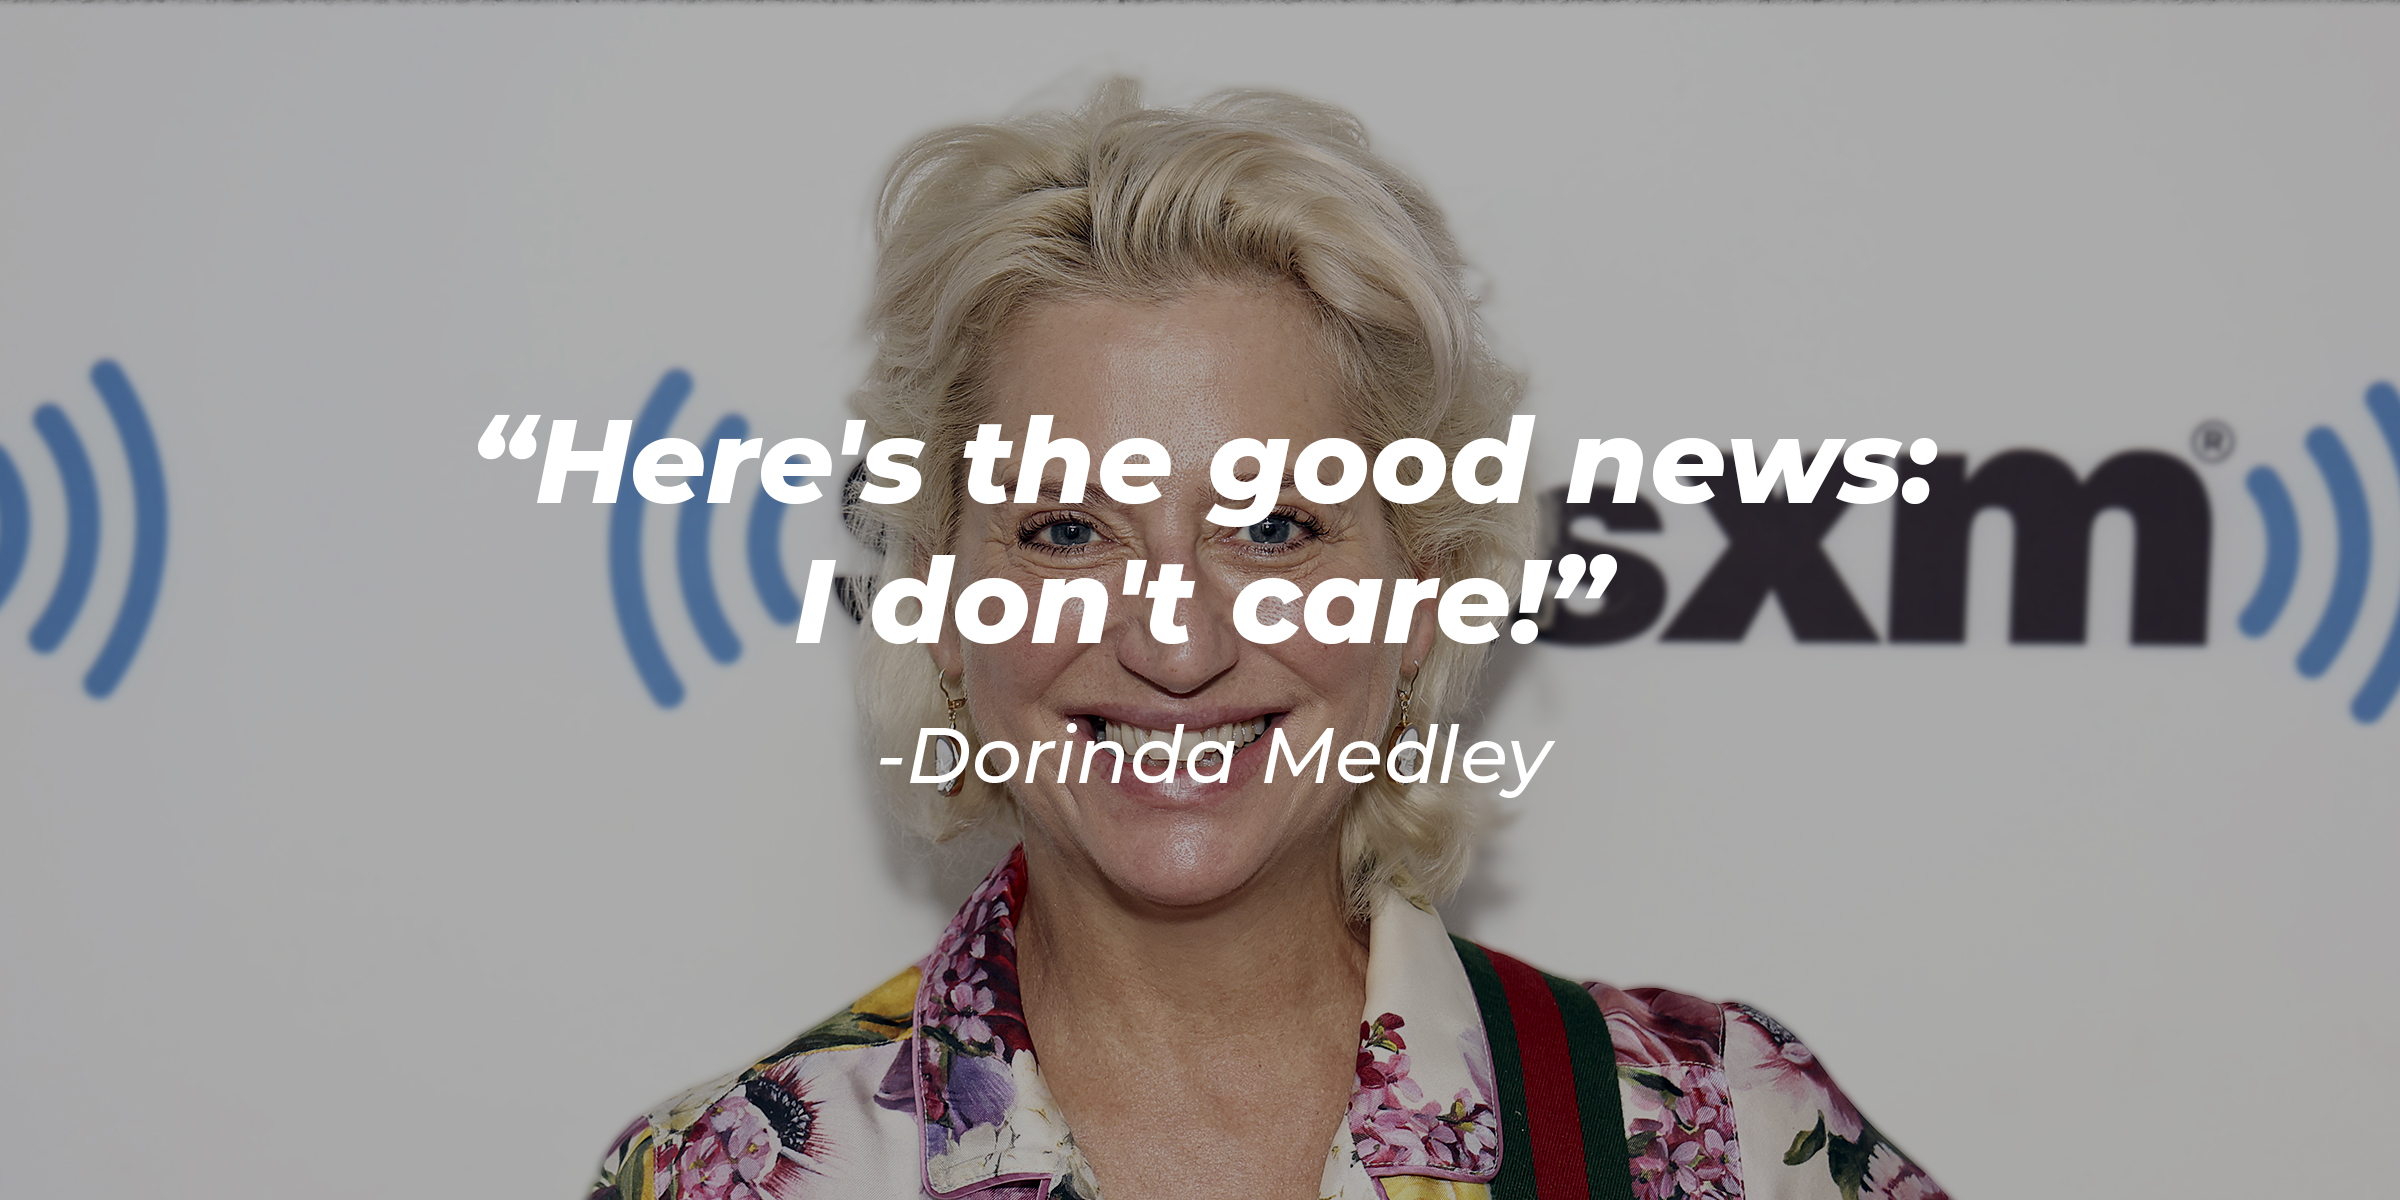 Dorinda Medley, with her quote: "Here's the good news: I don't care!" | Source: Getty Images